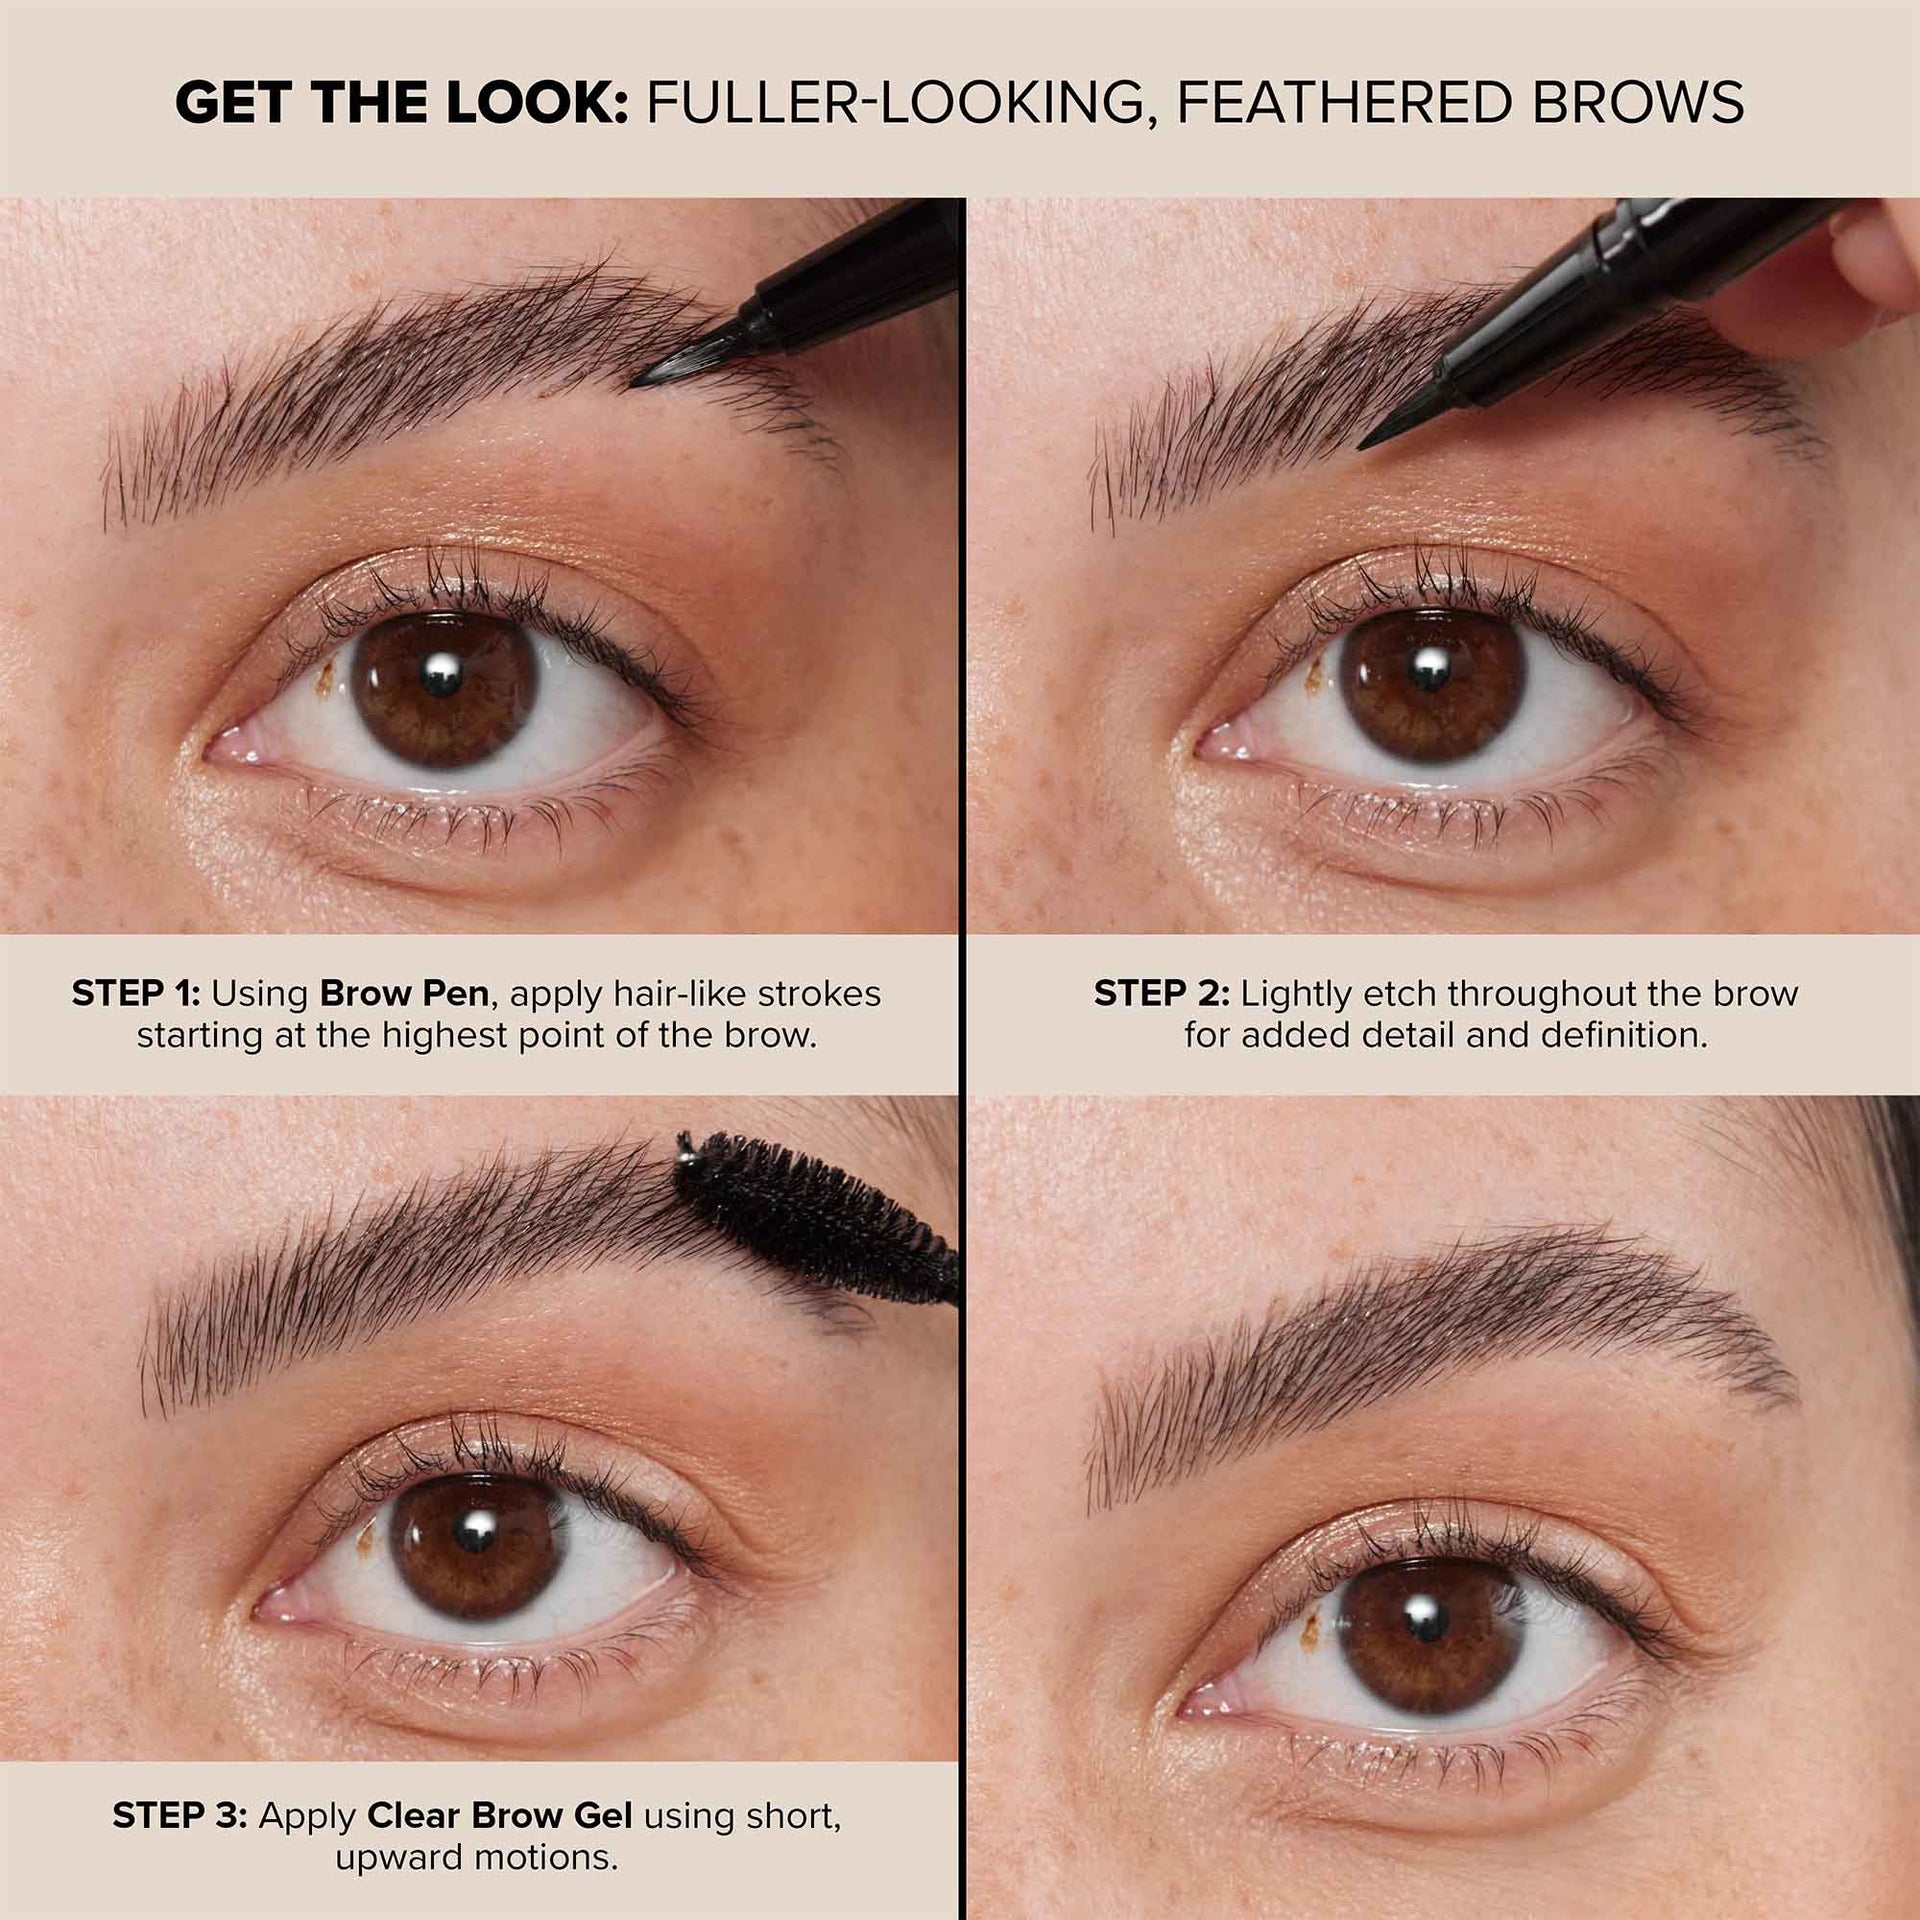 How to Brow Pen